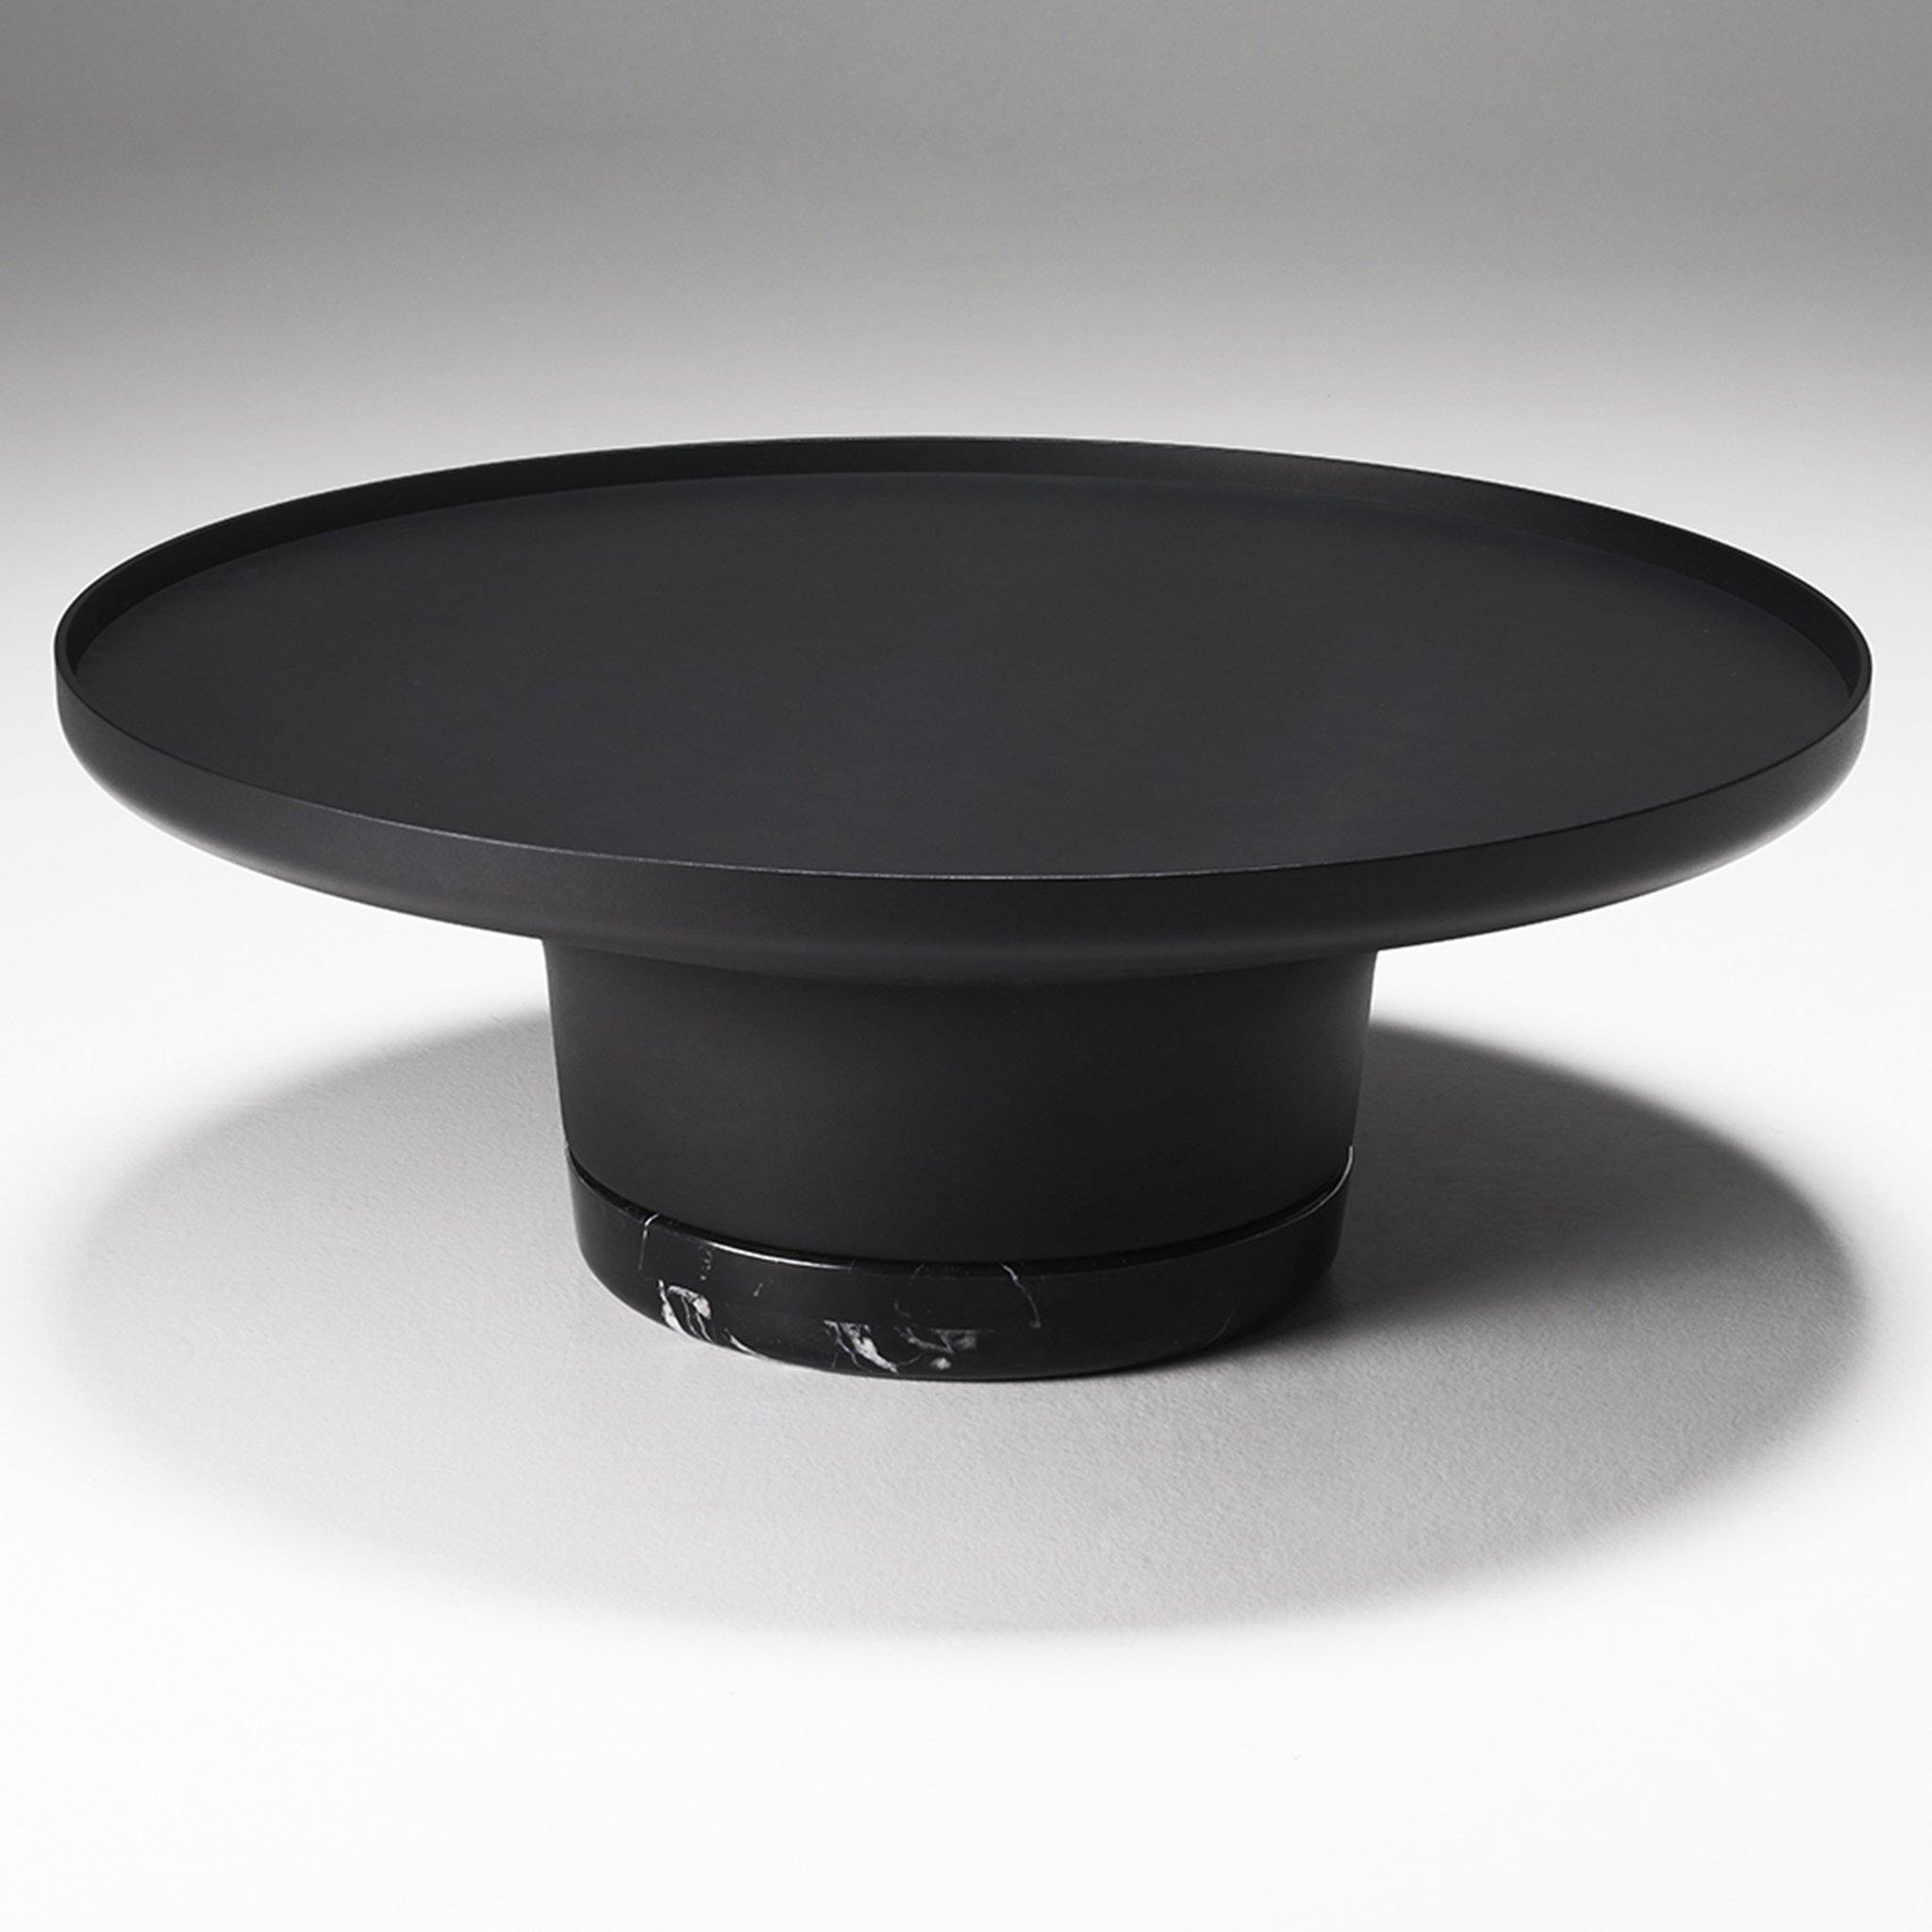 POLLER - Coffee Table - POET SDN BHD 